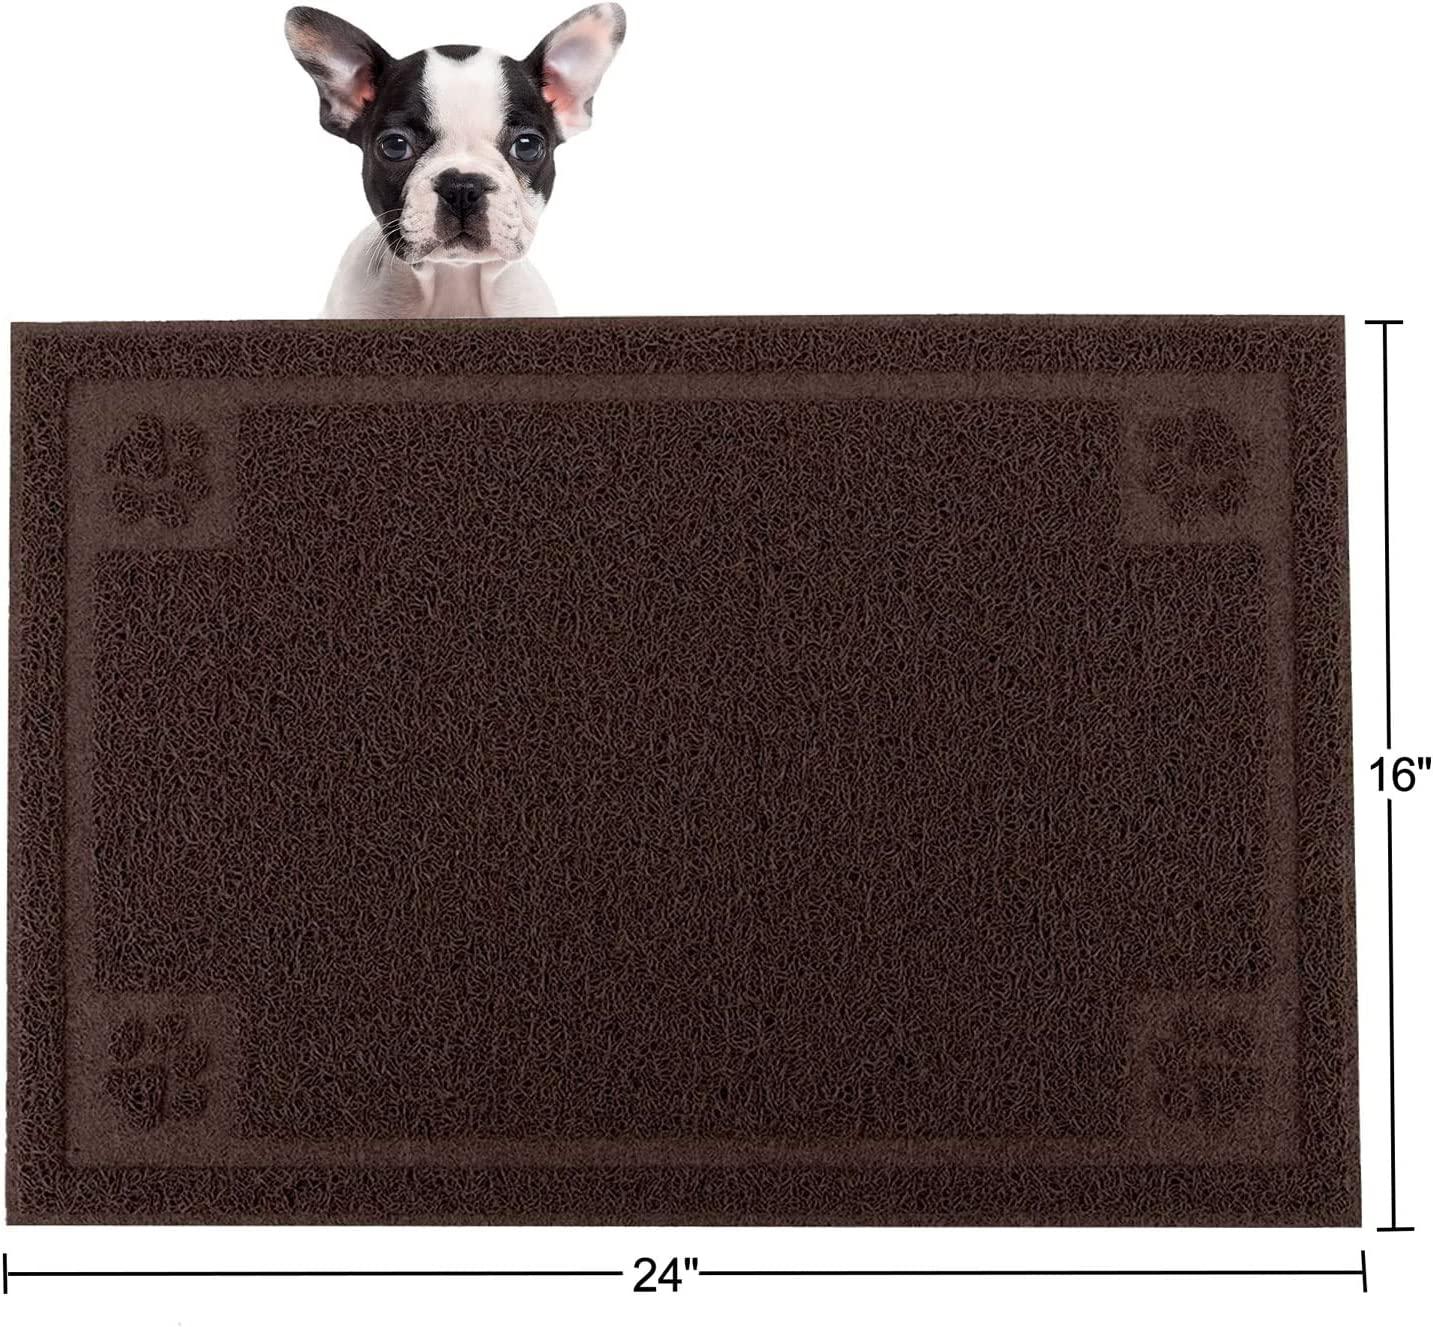 Urdogsl 24x36 Pet Feeding Mat for Dogs and Cats, Flexible Dog Dish Mats  for Food and Water, Waterproof and Slip Resistant Dog Food Mat to Prevent  Bowls Messes on Floor, Easy Clean